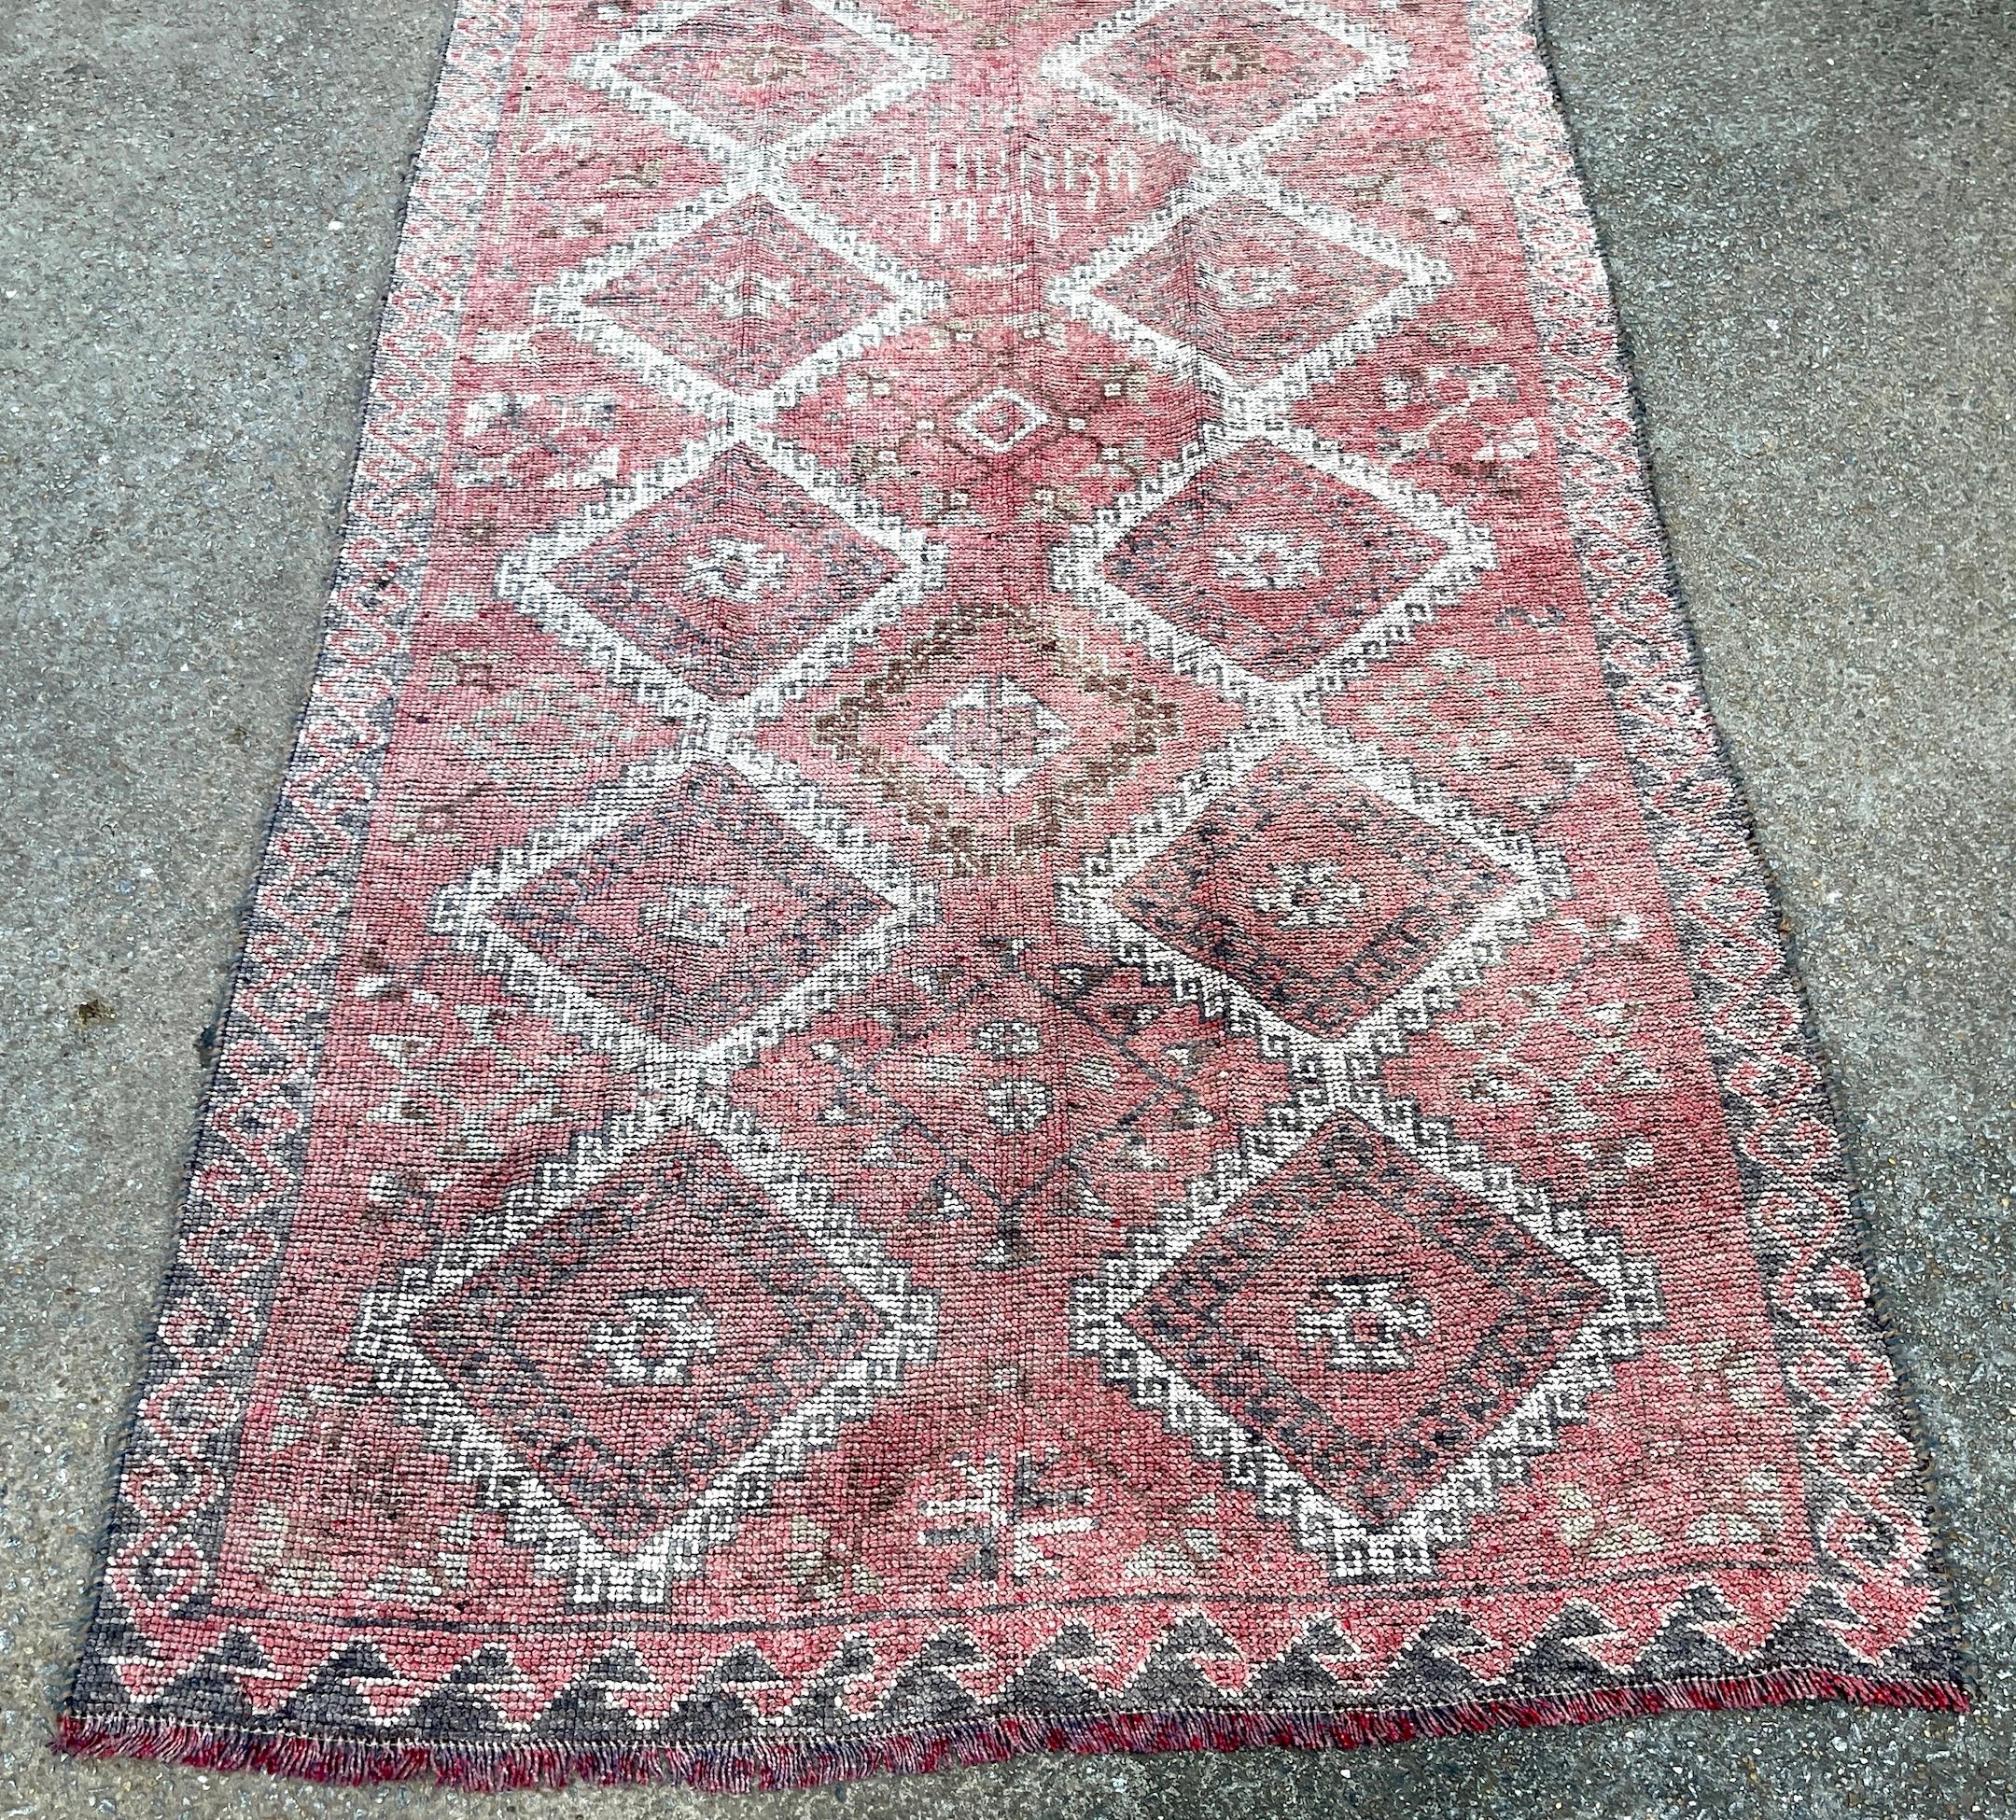 Vegetable Dyed Distressed Hand-Knotted Wool Caucasian Rug 'Reservable' Signed & Dated 1994 For Sale